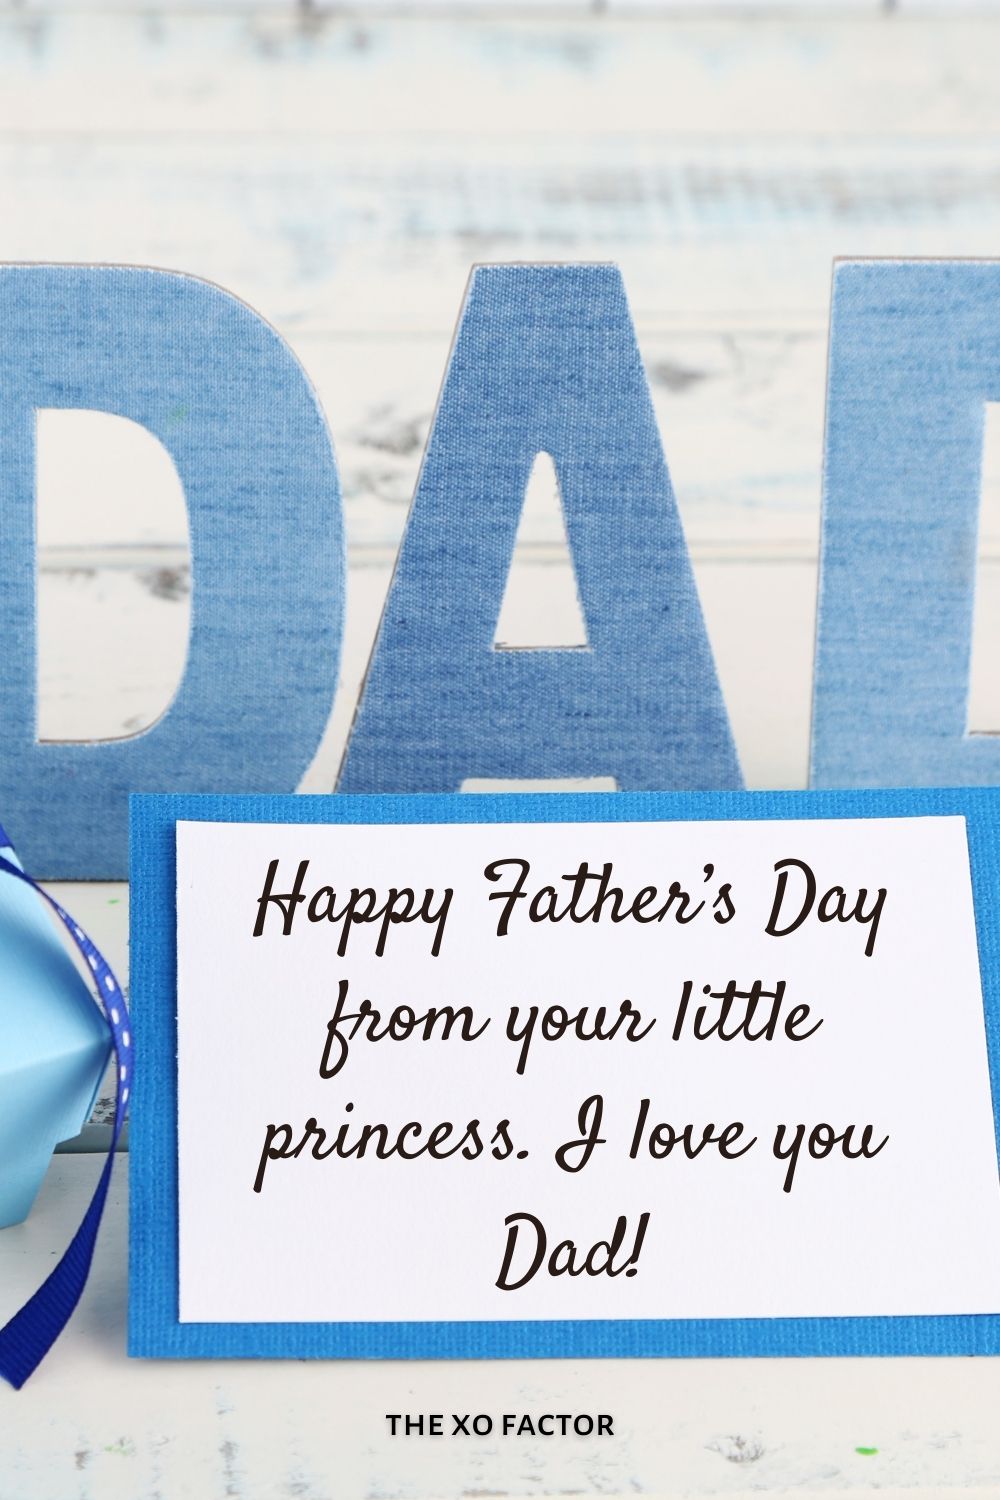 Happy Father’s Day from your little princess. I love you Dad!